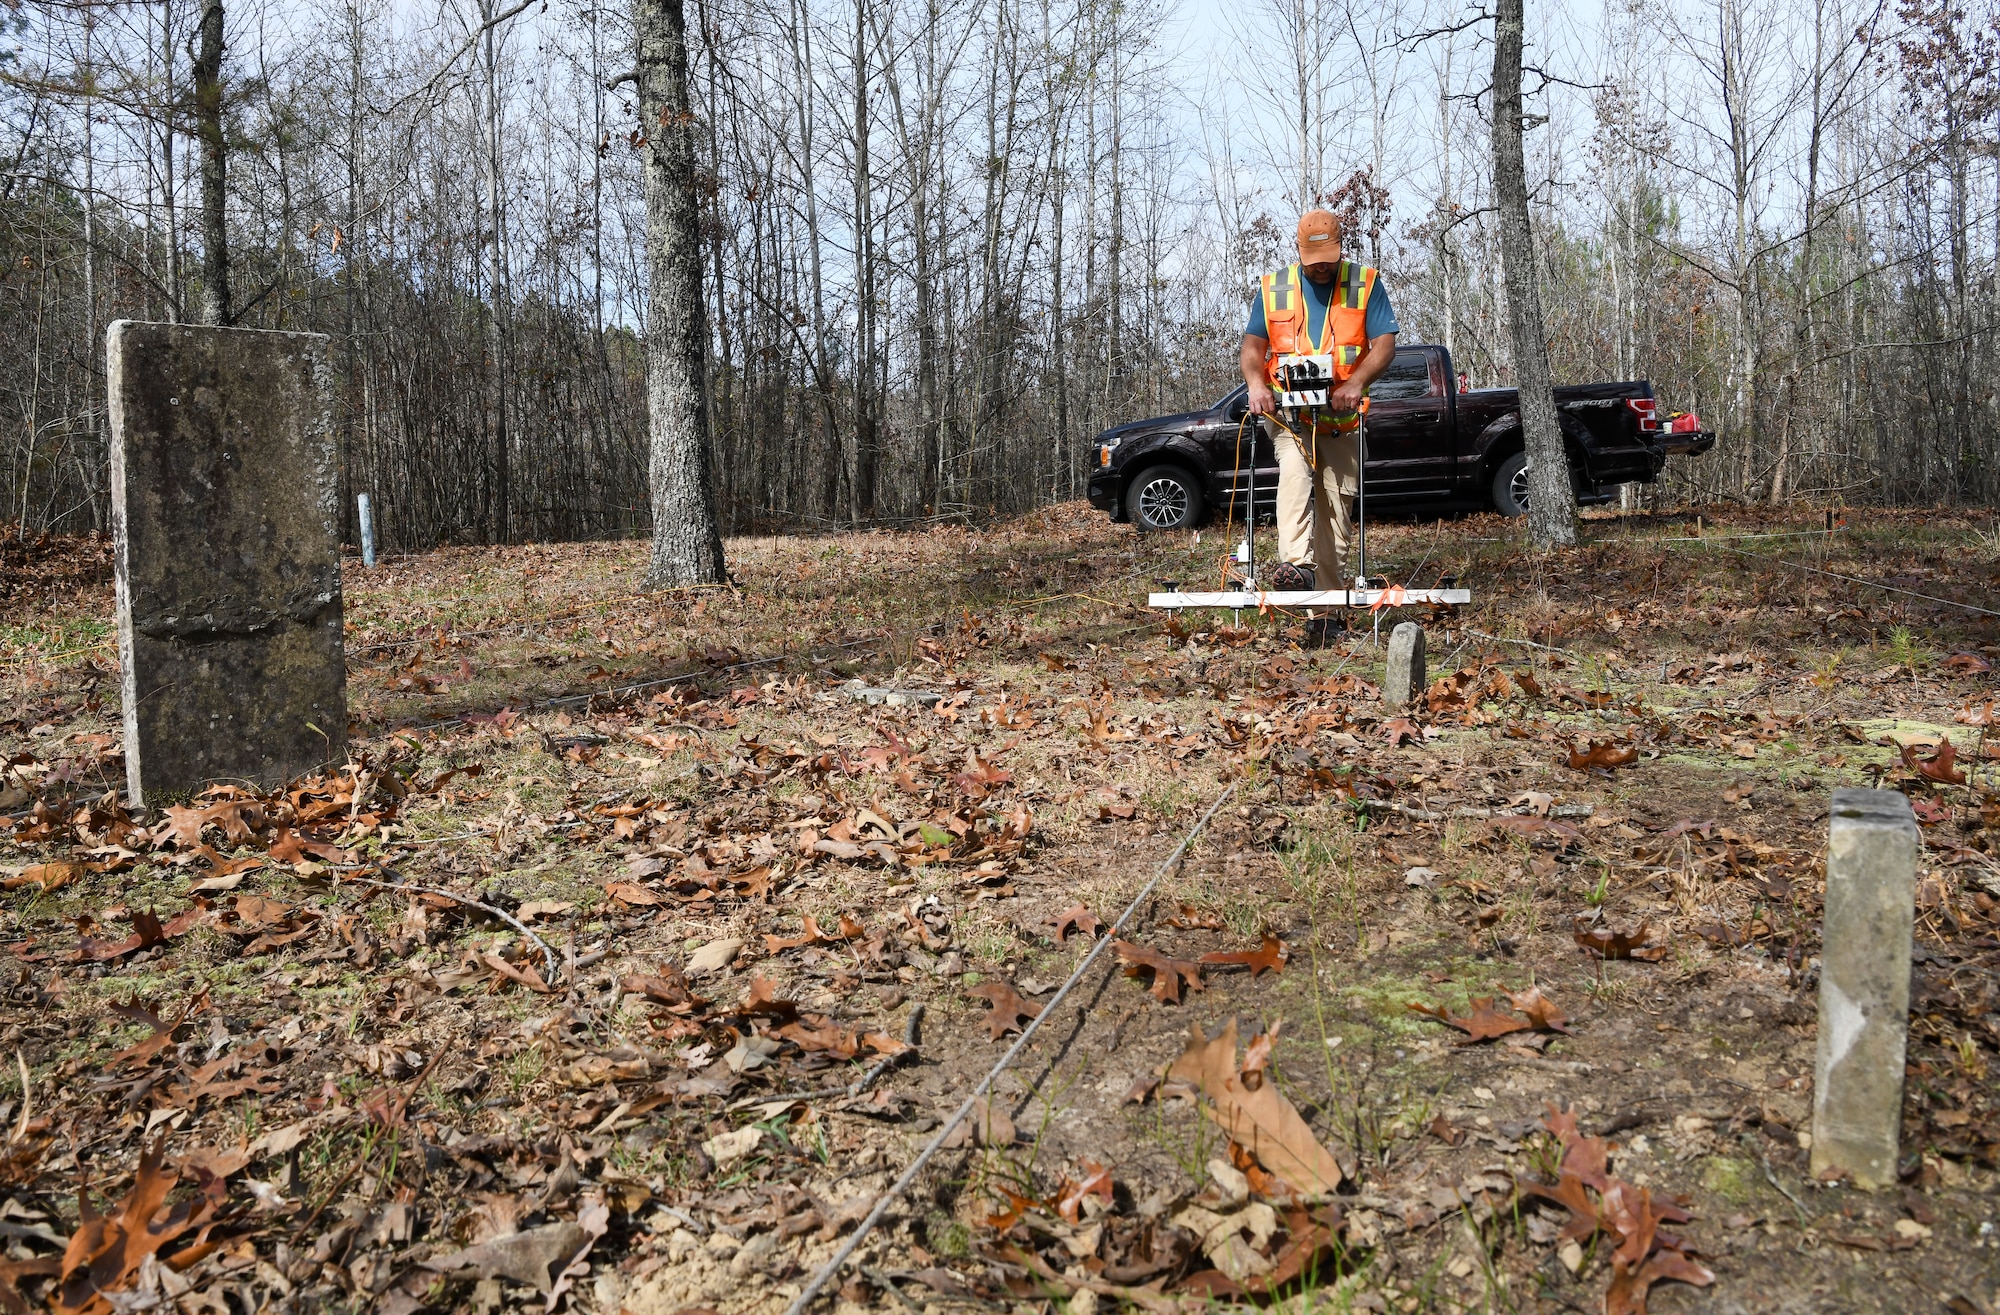 Steve Martin, an archaeologist who specializes in geophysics, uses an electrical resistance meter to survey the Chapel Hill Cemetery at Arnold Air Force Base, Tennessee, Nov. 10, 2022. The survey can help the archaeologists assess what has happened below the surface in an area. This information can then be interpreted to identify possible graves that were never marked or the markers are no longer in place. (U.S. Air Force photo by Jill Pickett)